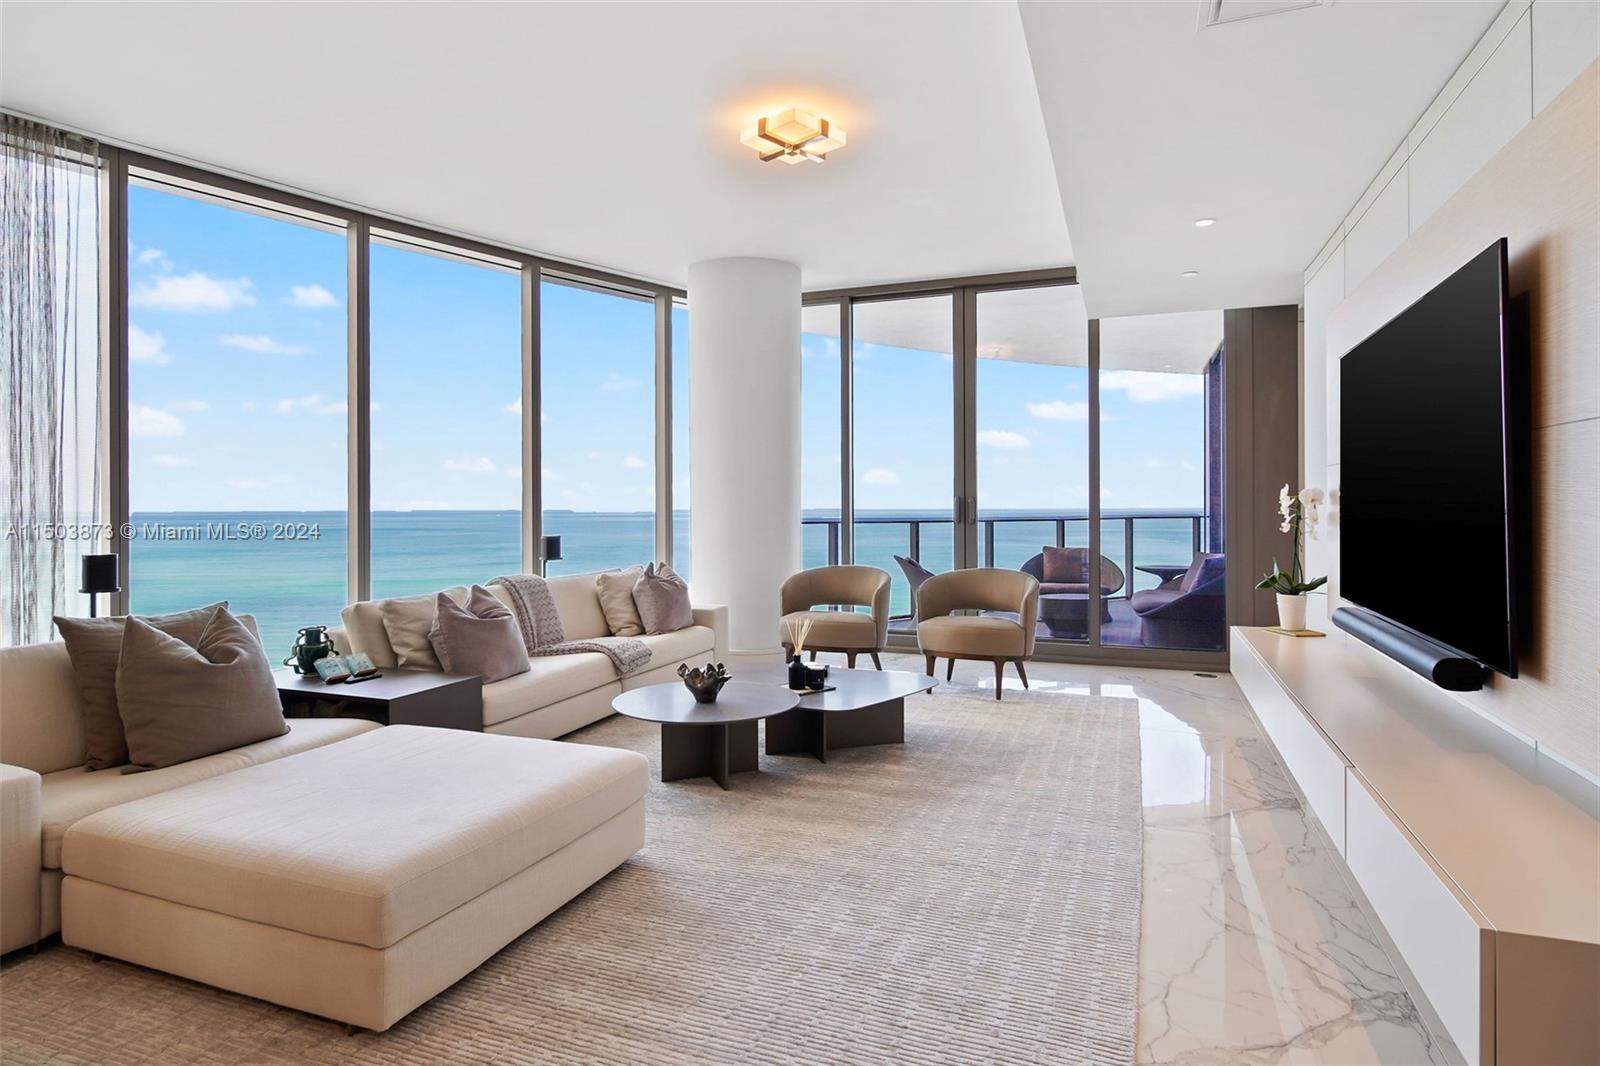 Welcome to the epitome of luxury living at The Ritz Carlton Sunny Isles, where this exquisite flow-through 4-bed & 4.5 bath oceanfront condo in over 3,000 sq.ft. of living space awaits you.  Perched on the pristine shores of Sunny Isles Beach, this elegant home offers spacious interiors & an open living space w/room for family & friends to relax & unwind. Located just minutes from upscale shopping, fine dining, & cultural attractions & conveniently positioned between Miami & Ft. Lauderdale, making it easy to access both cities & their international airports.
Enjoy 5-star Ritz Carlton services, including concierge, valet, 24-hour security, on-site restaurant, movie theater, wine lounge, spa, fitness center & so much more. Also available furnished for $5,299,000.